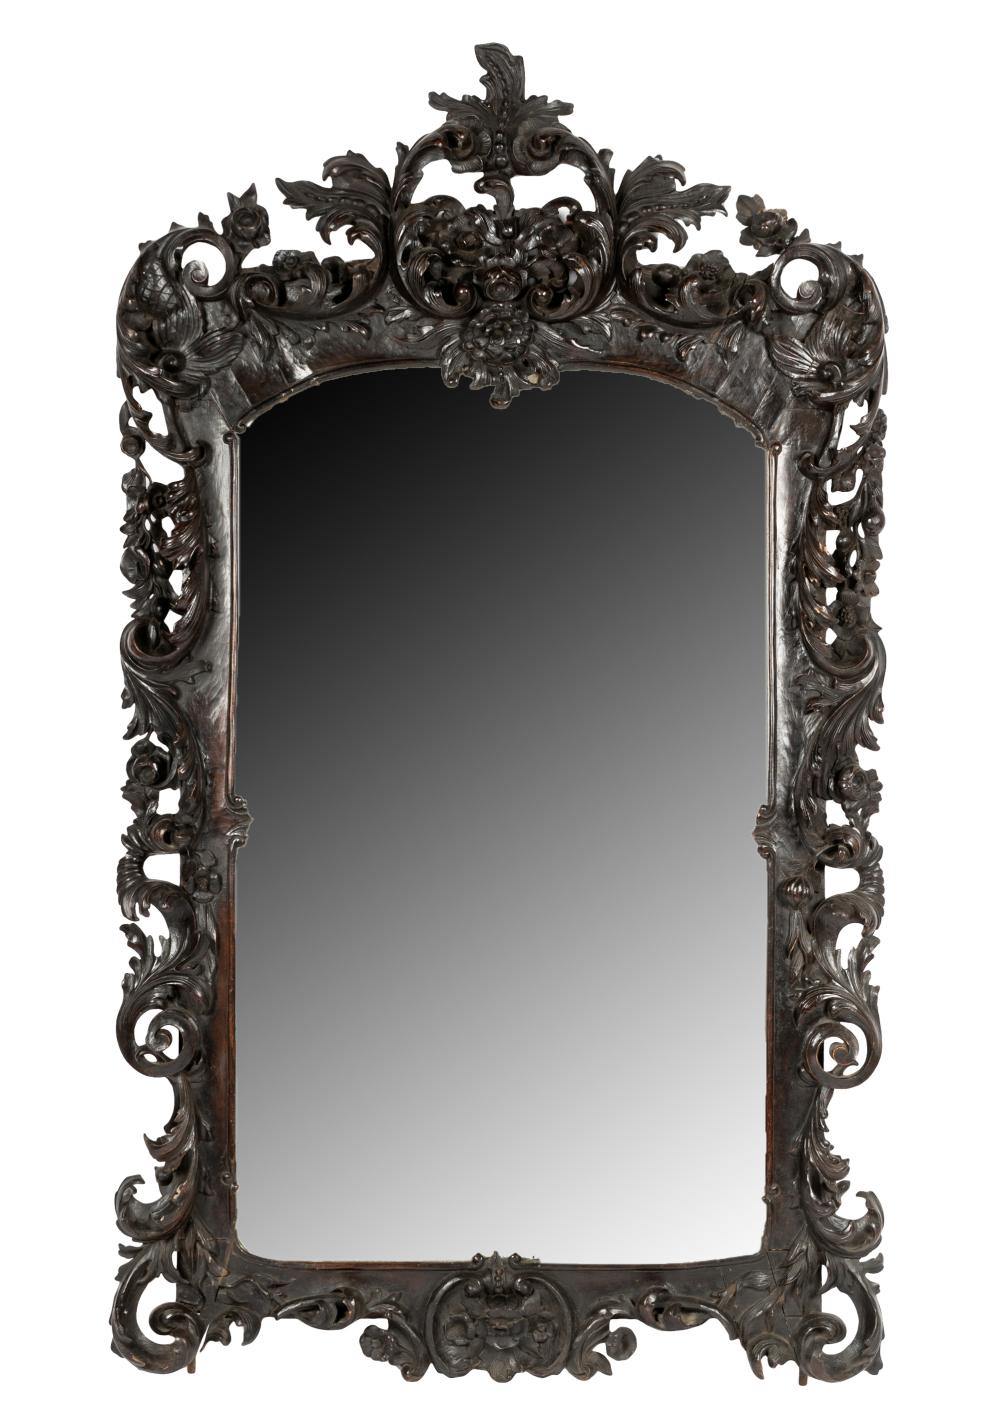 BAROQUE-STYLE CARVED WOOD WALL MIRRORwith